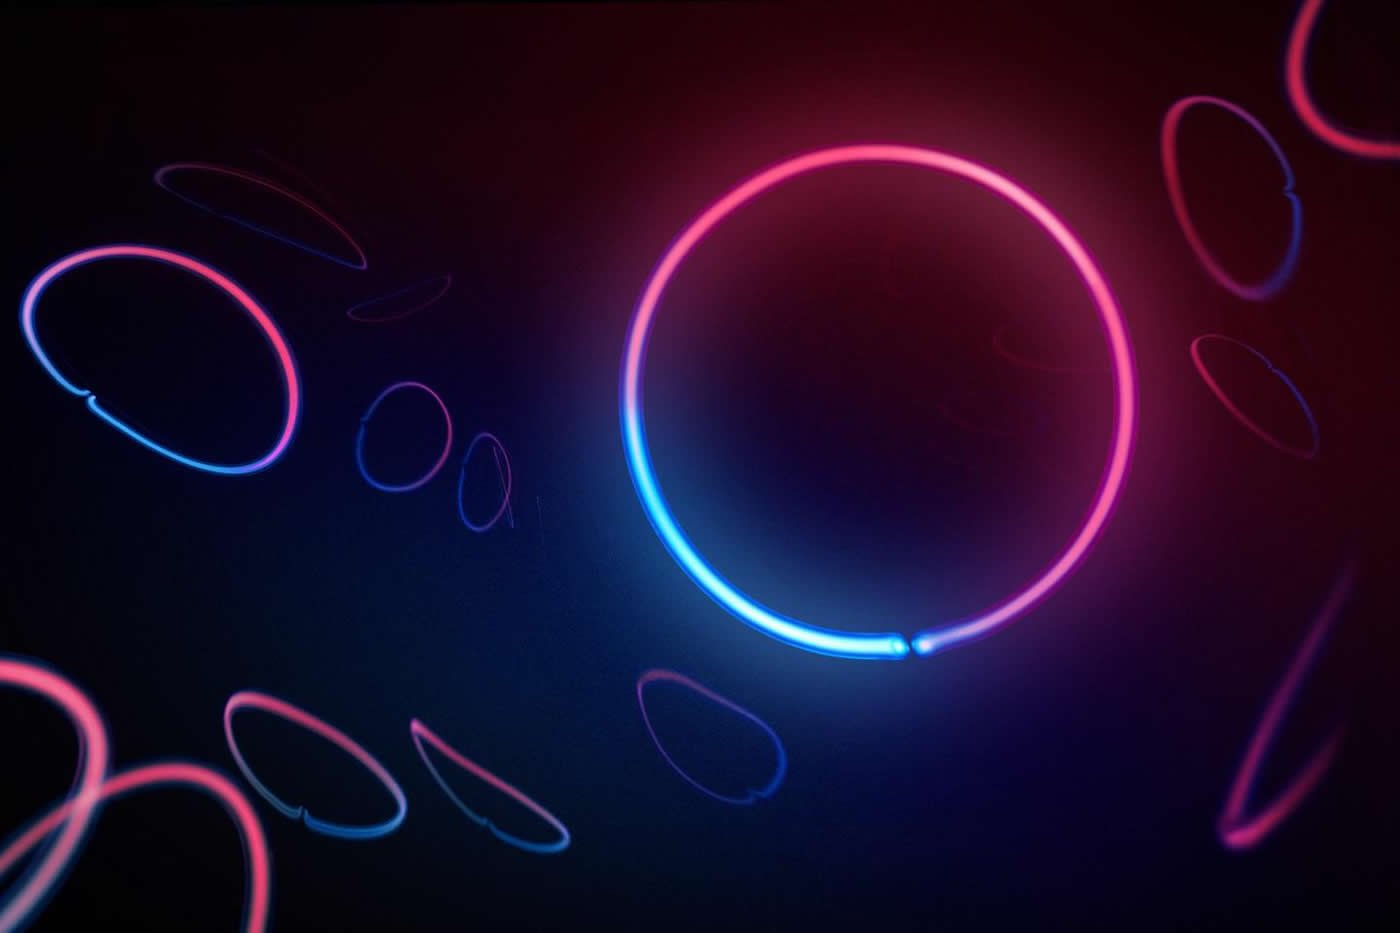 Image shows pink and blue circles.